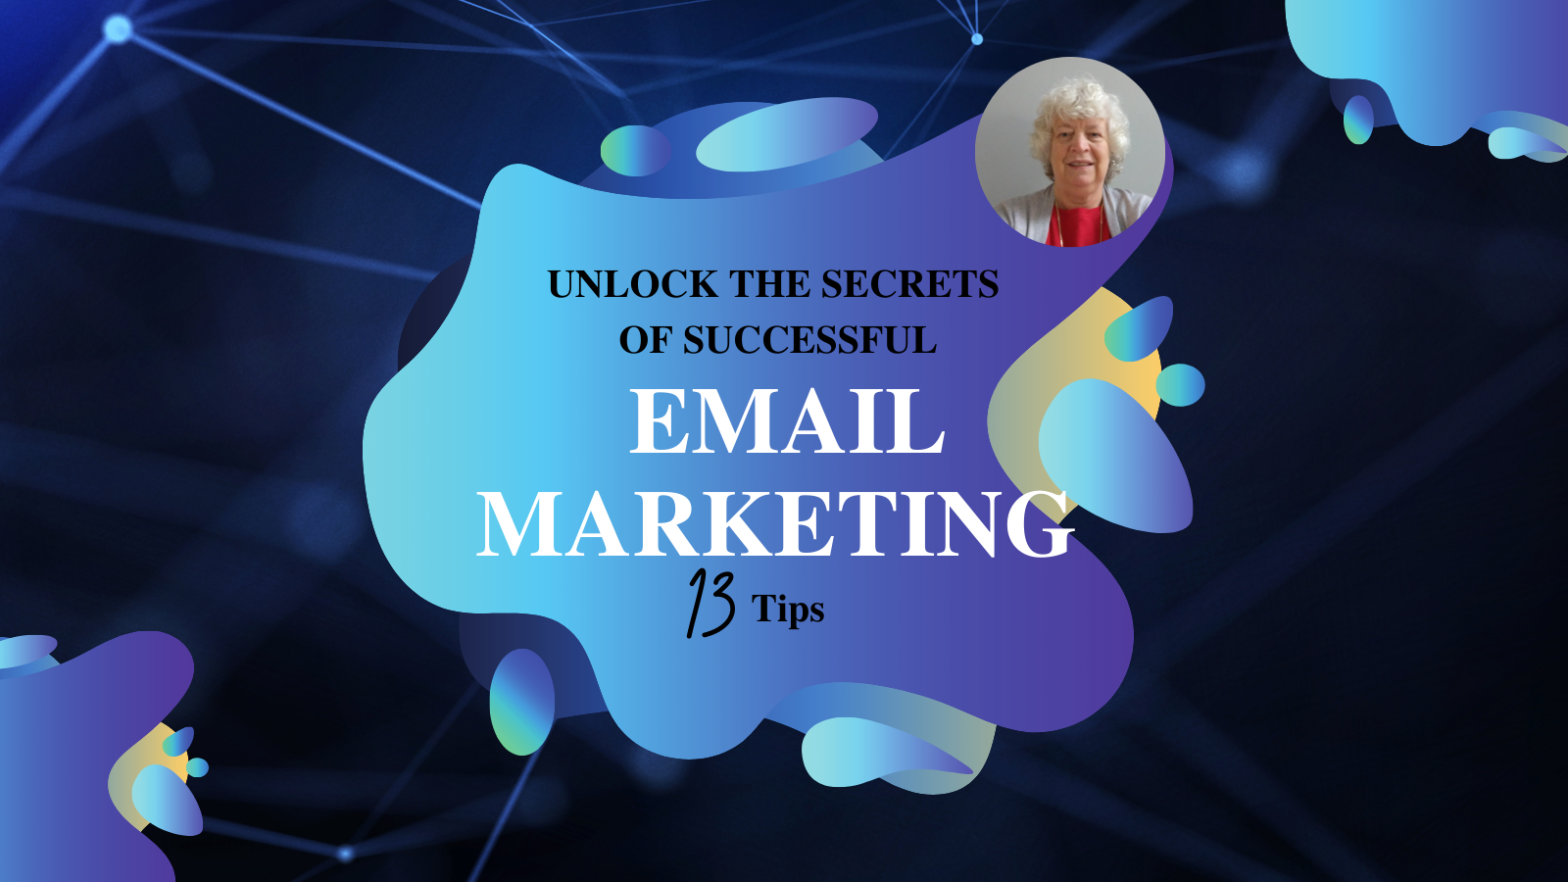 Email marketing tips